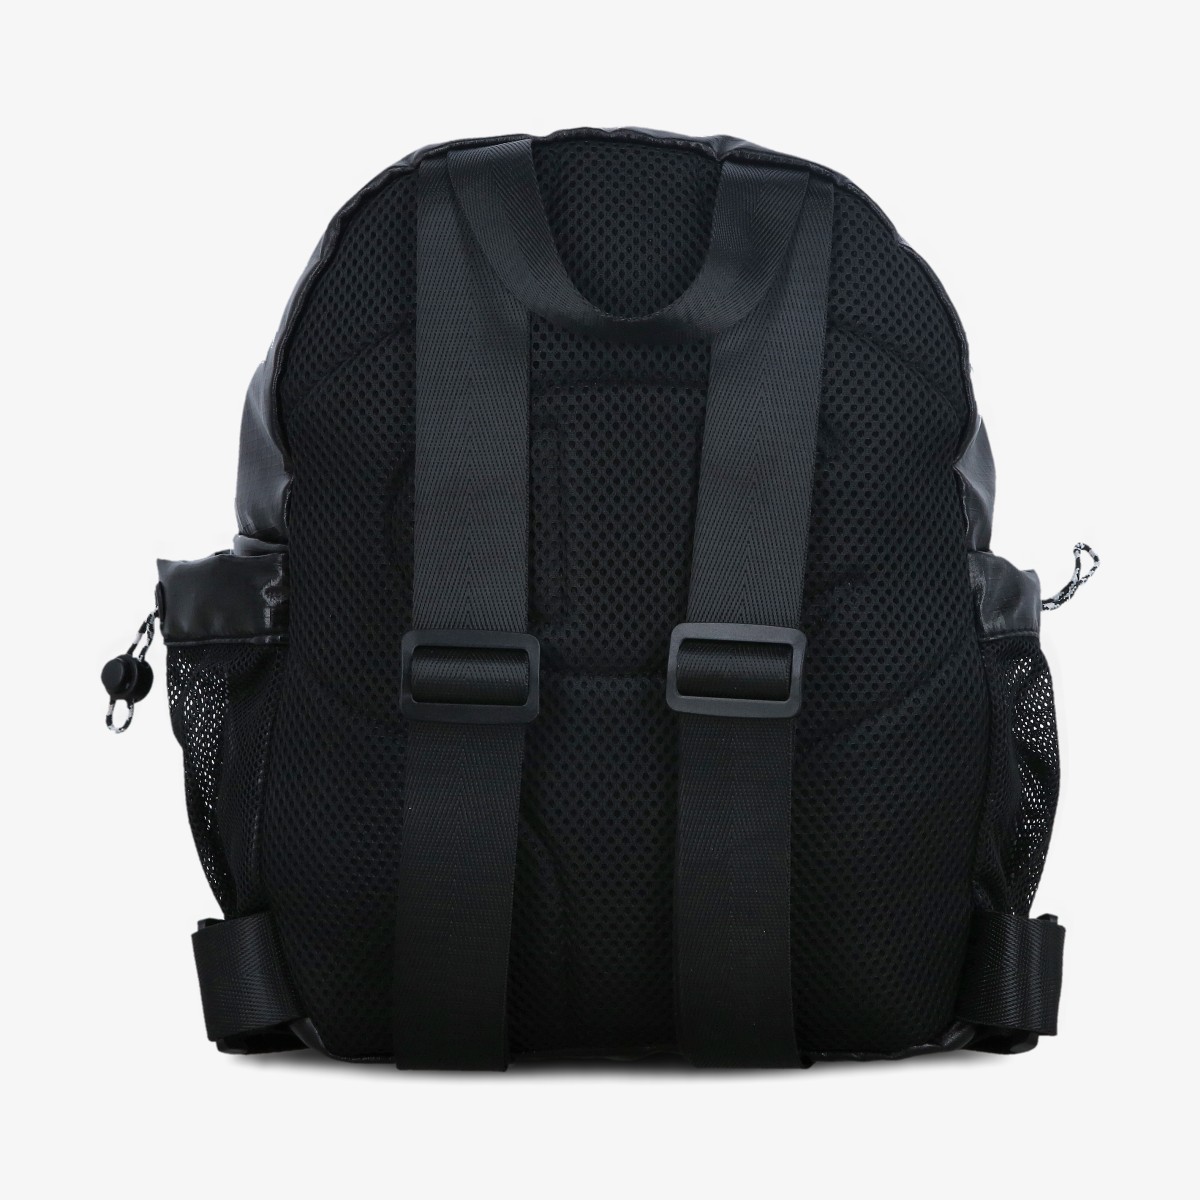 CHMP SIMPLE BACKPACK 